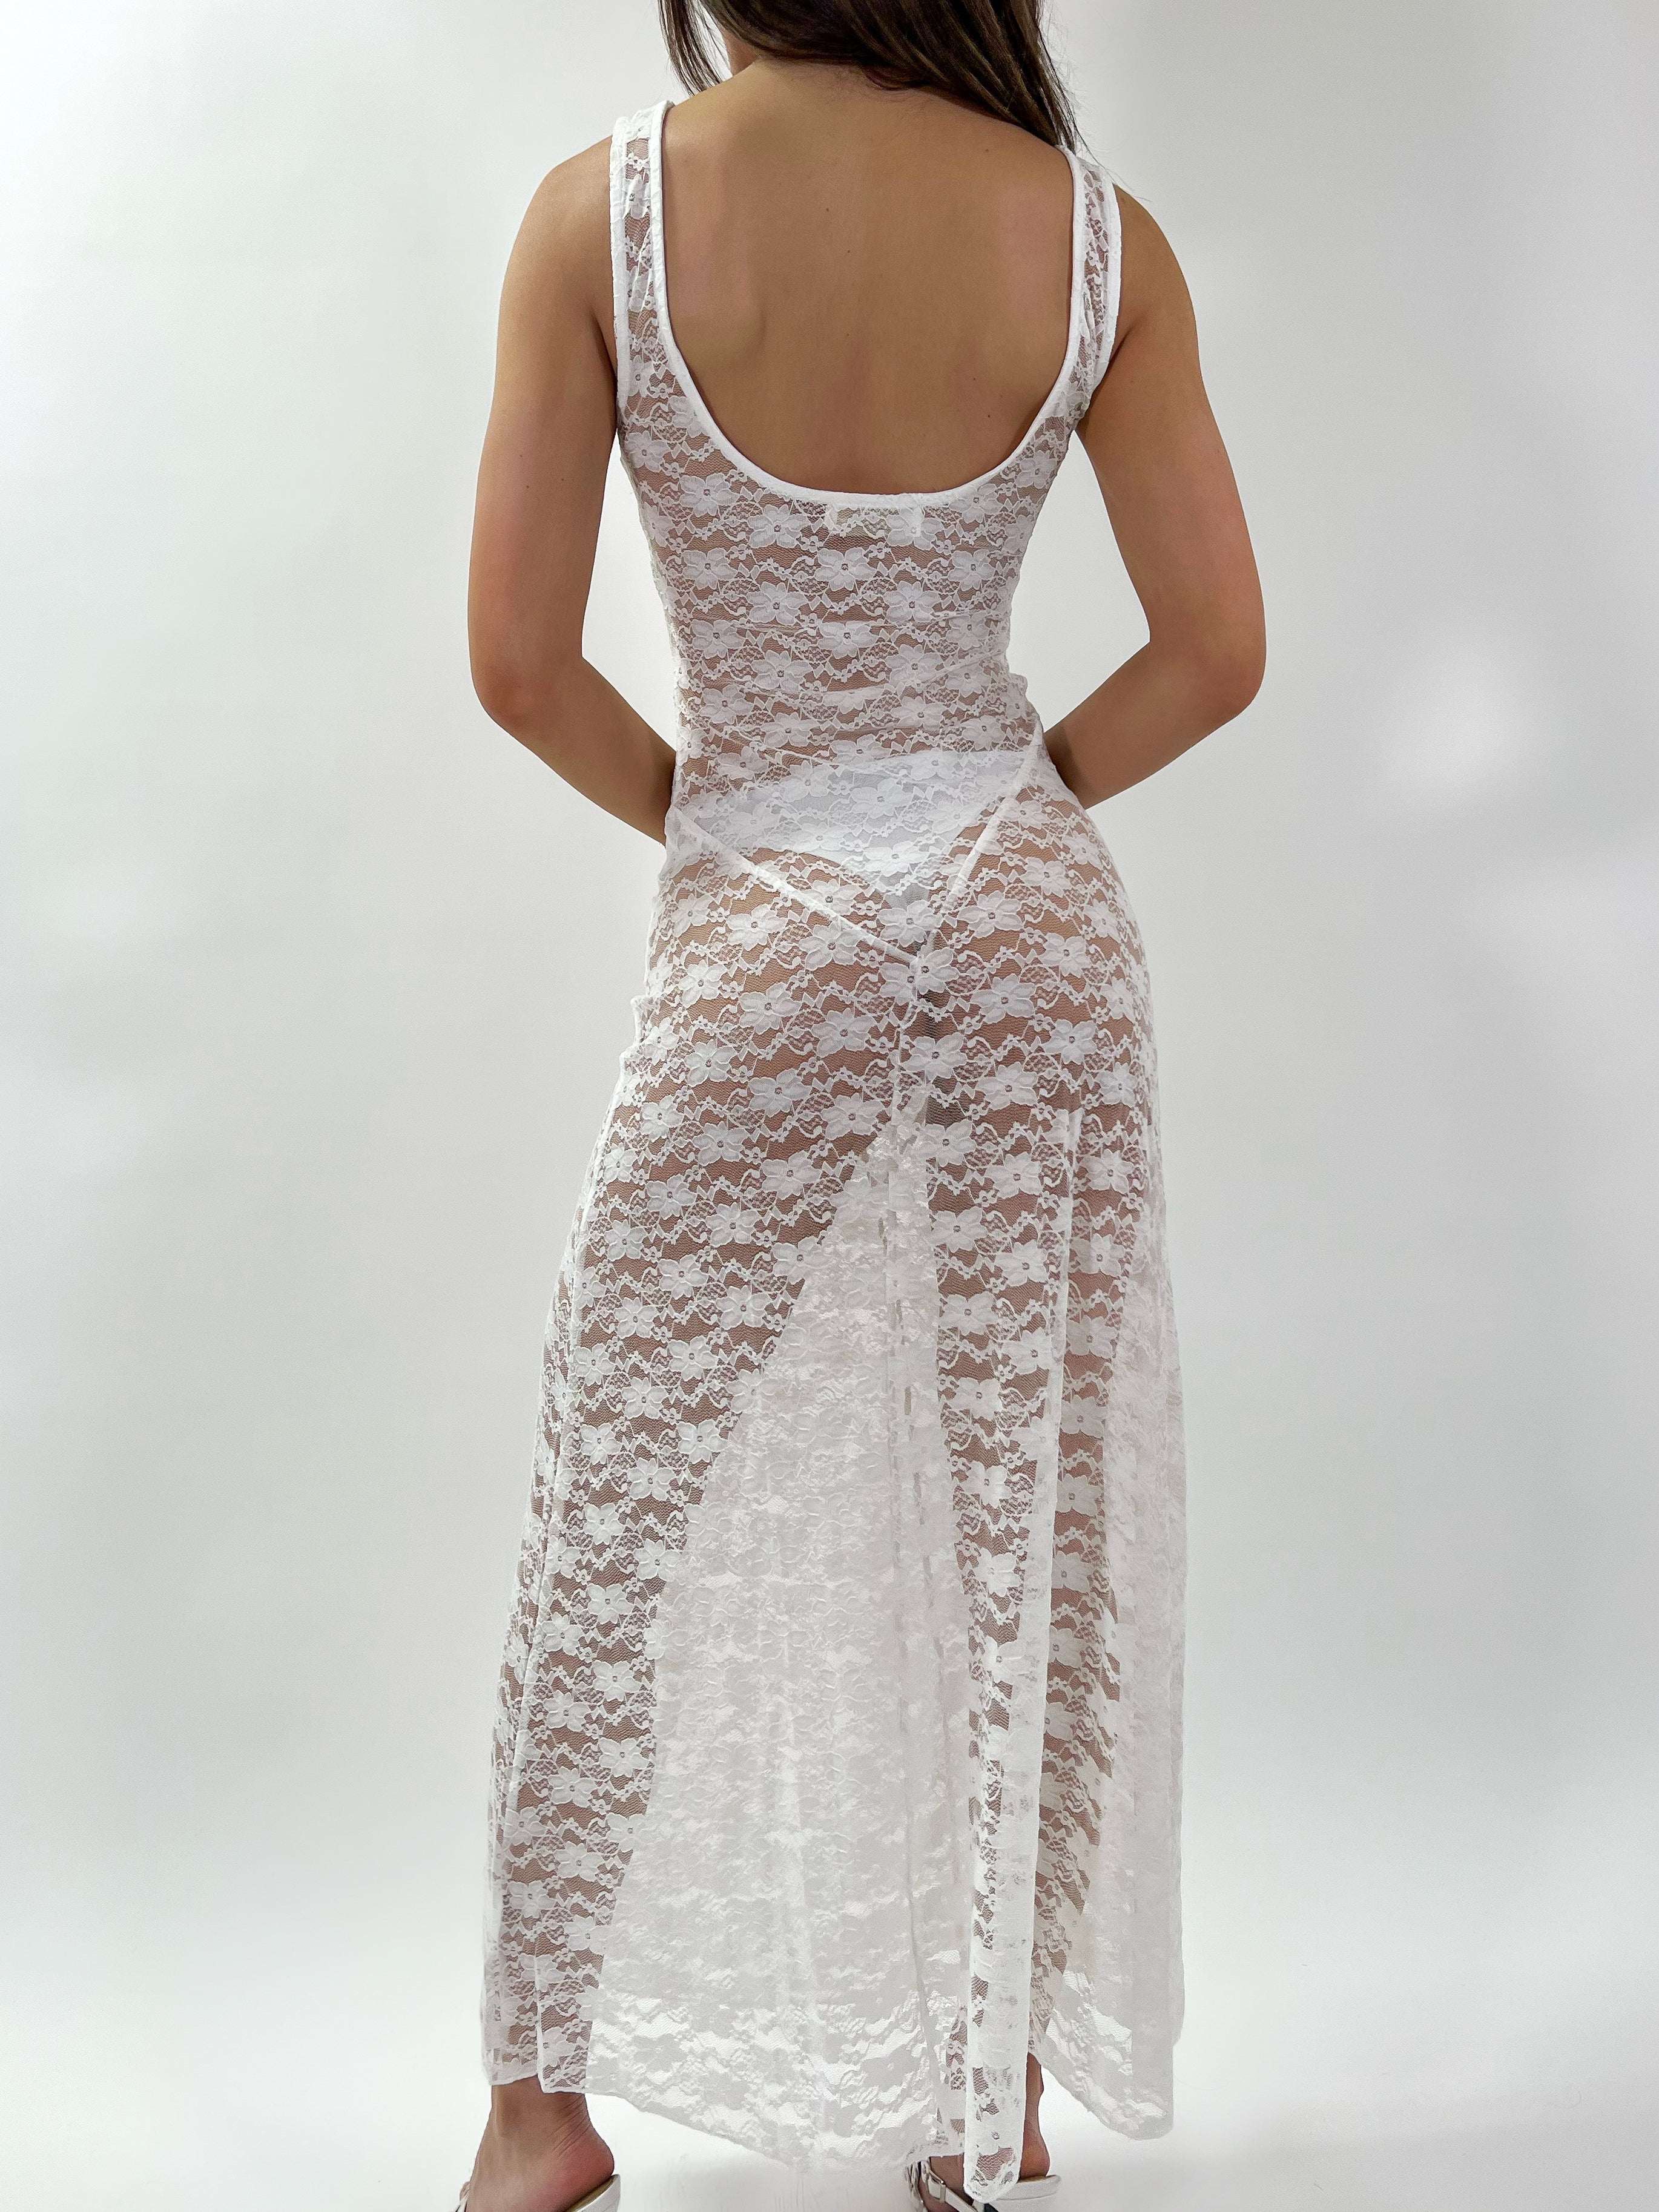 Jessica Sheer Lace Dress (Off White) - Laura's Boutique, Inc